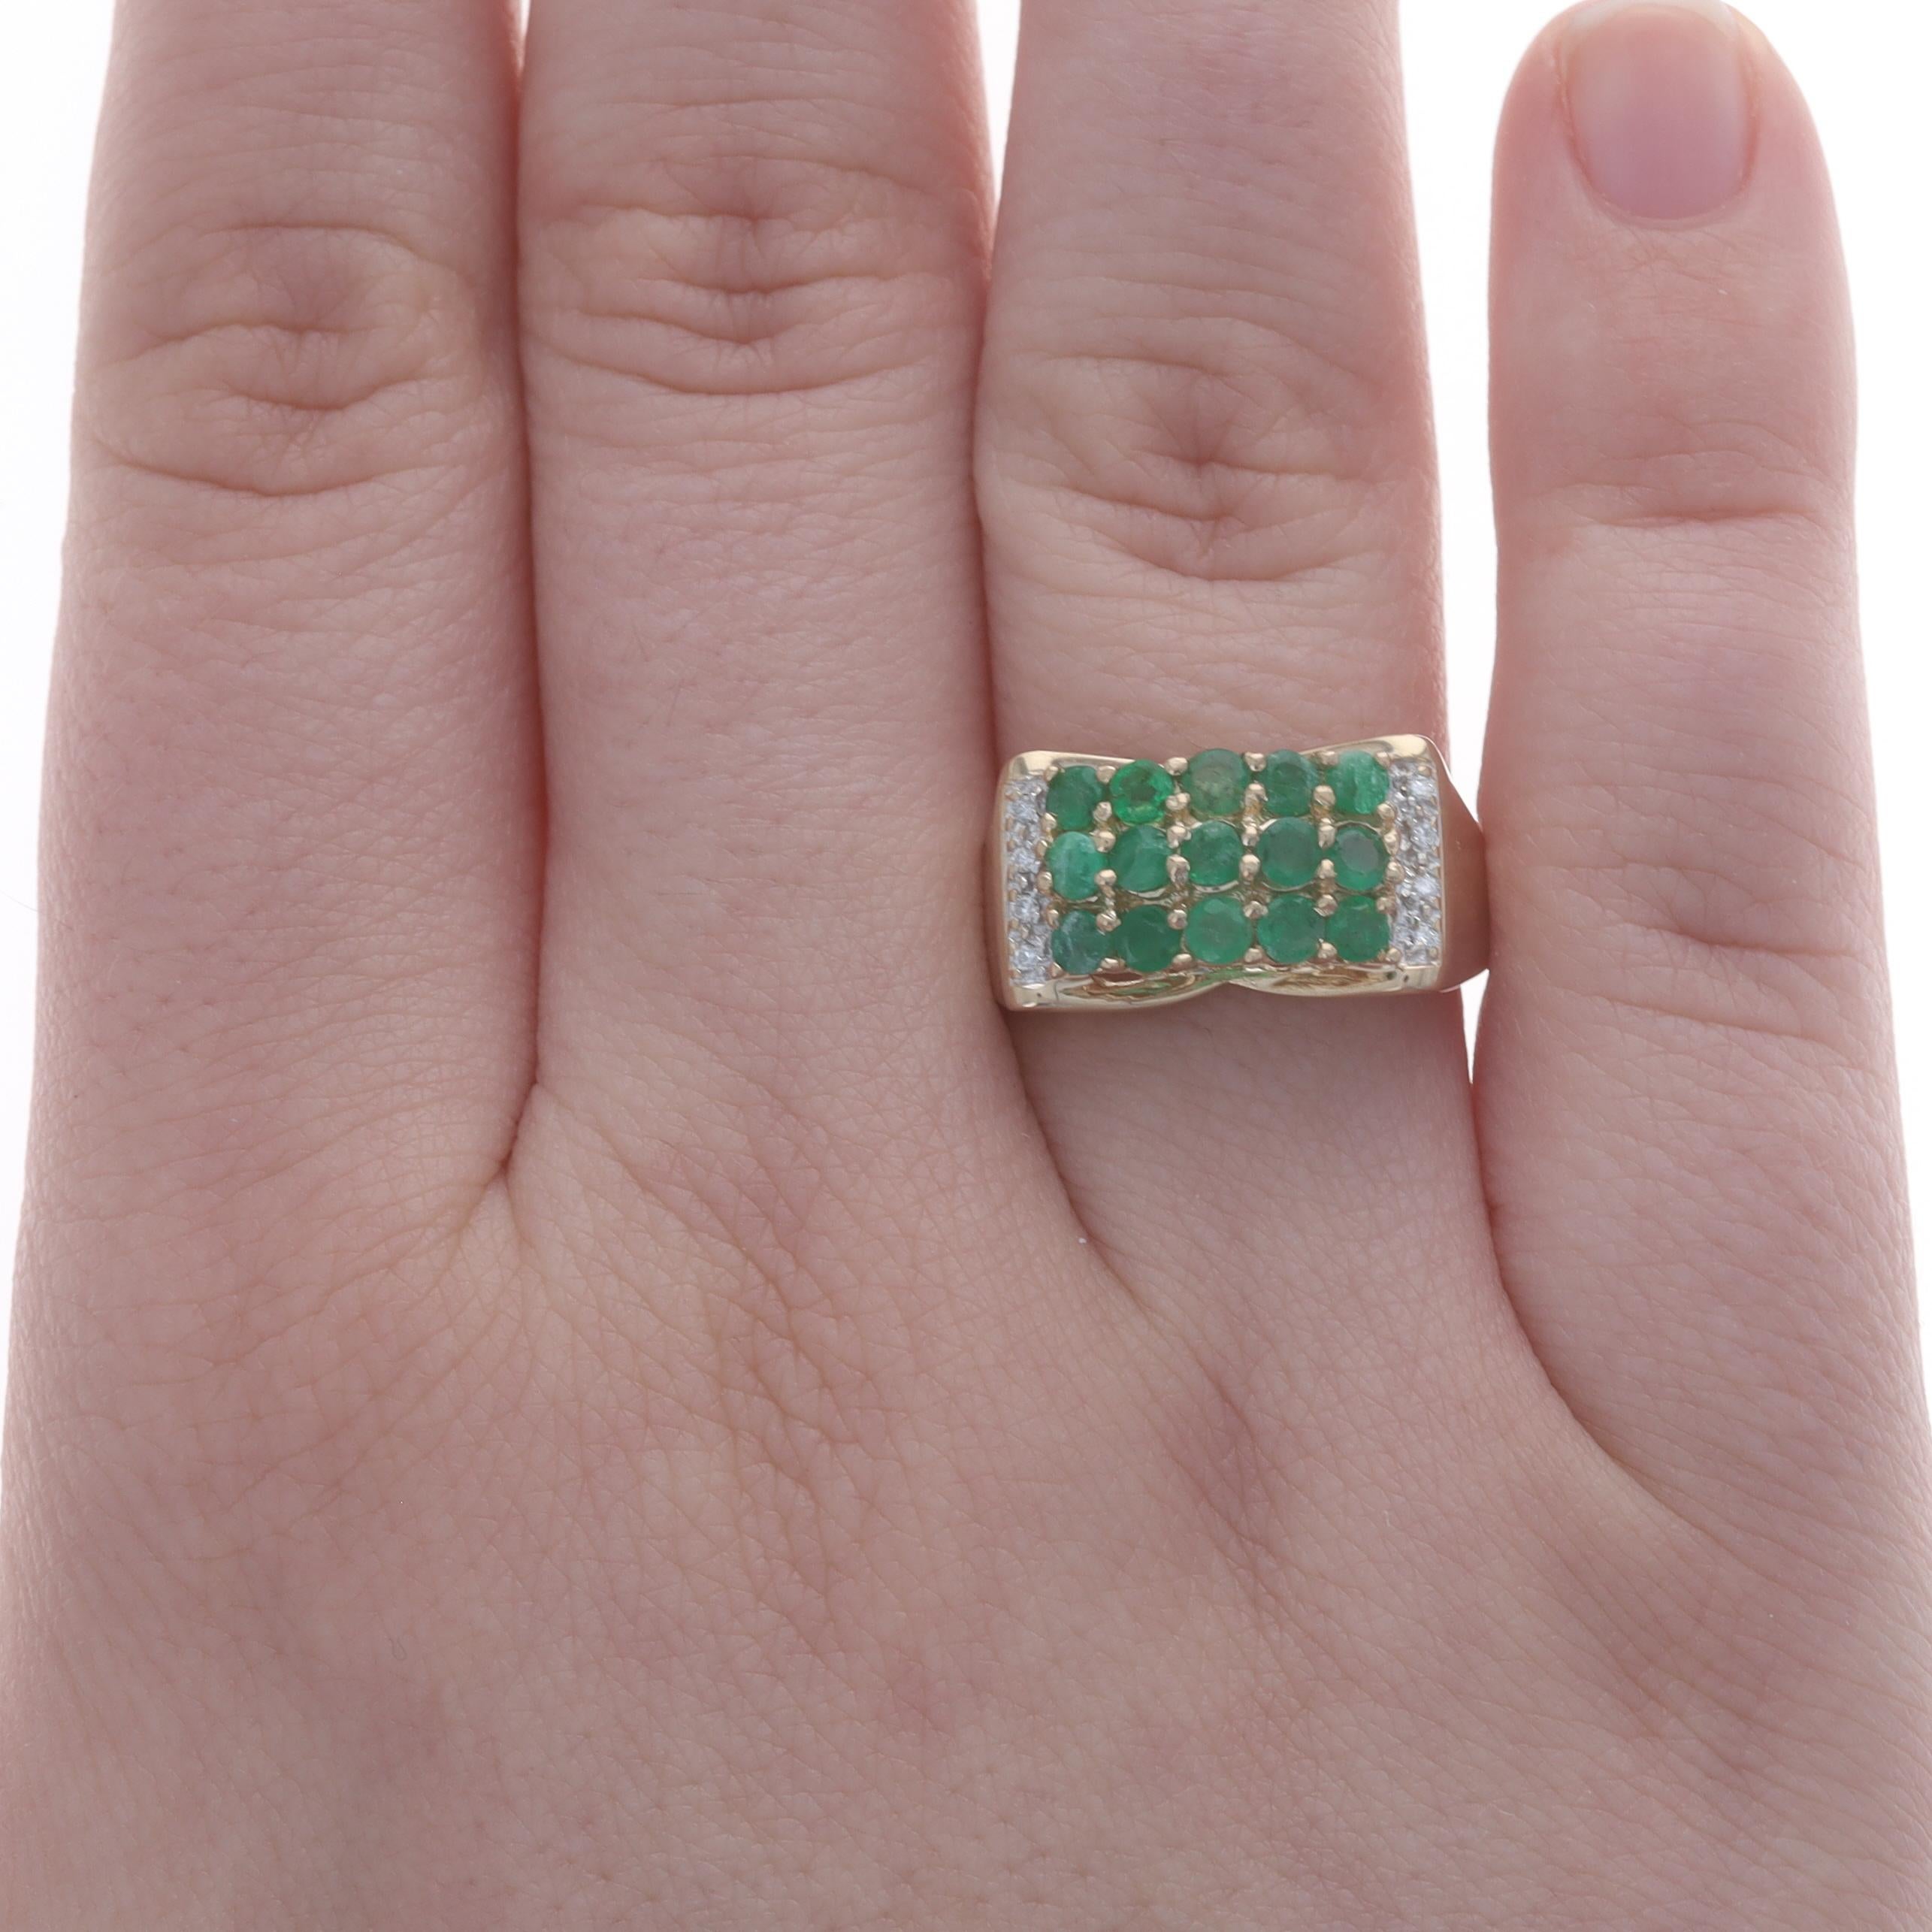 Size: 7
Sizing Fee: Up 2 sizes for $35 or Down 1 1/2 sizes for $30

Metal Content: 14k Yellow Gold & 14k White Gold

Stone Information
Natural Emeralds
Treatment: Oiling
Carat(s): 1.20ctw
Cut: Round
Color: Green

Natural Diamonds
Carat(s):